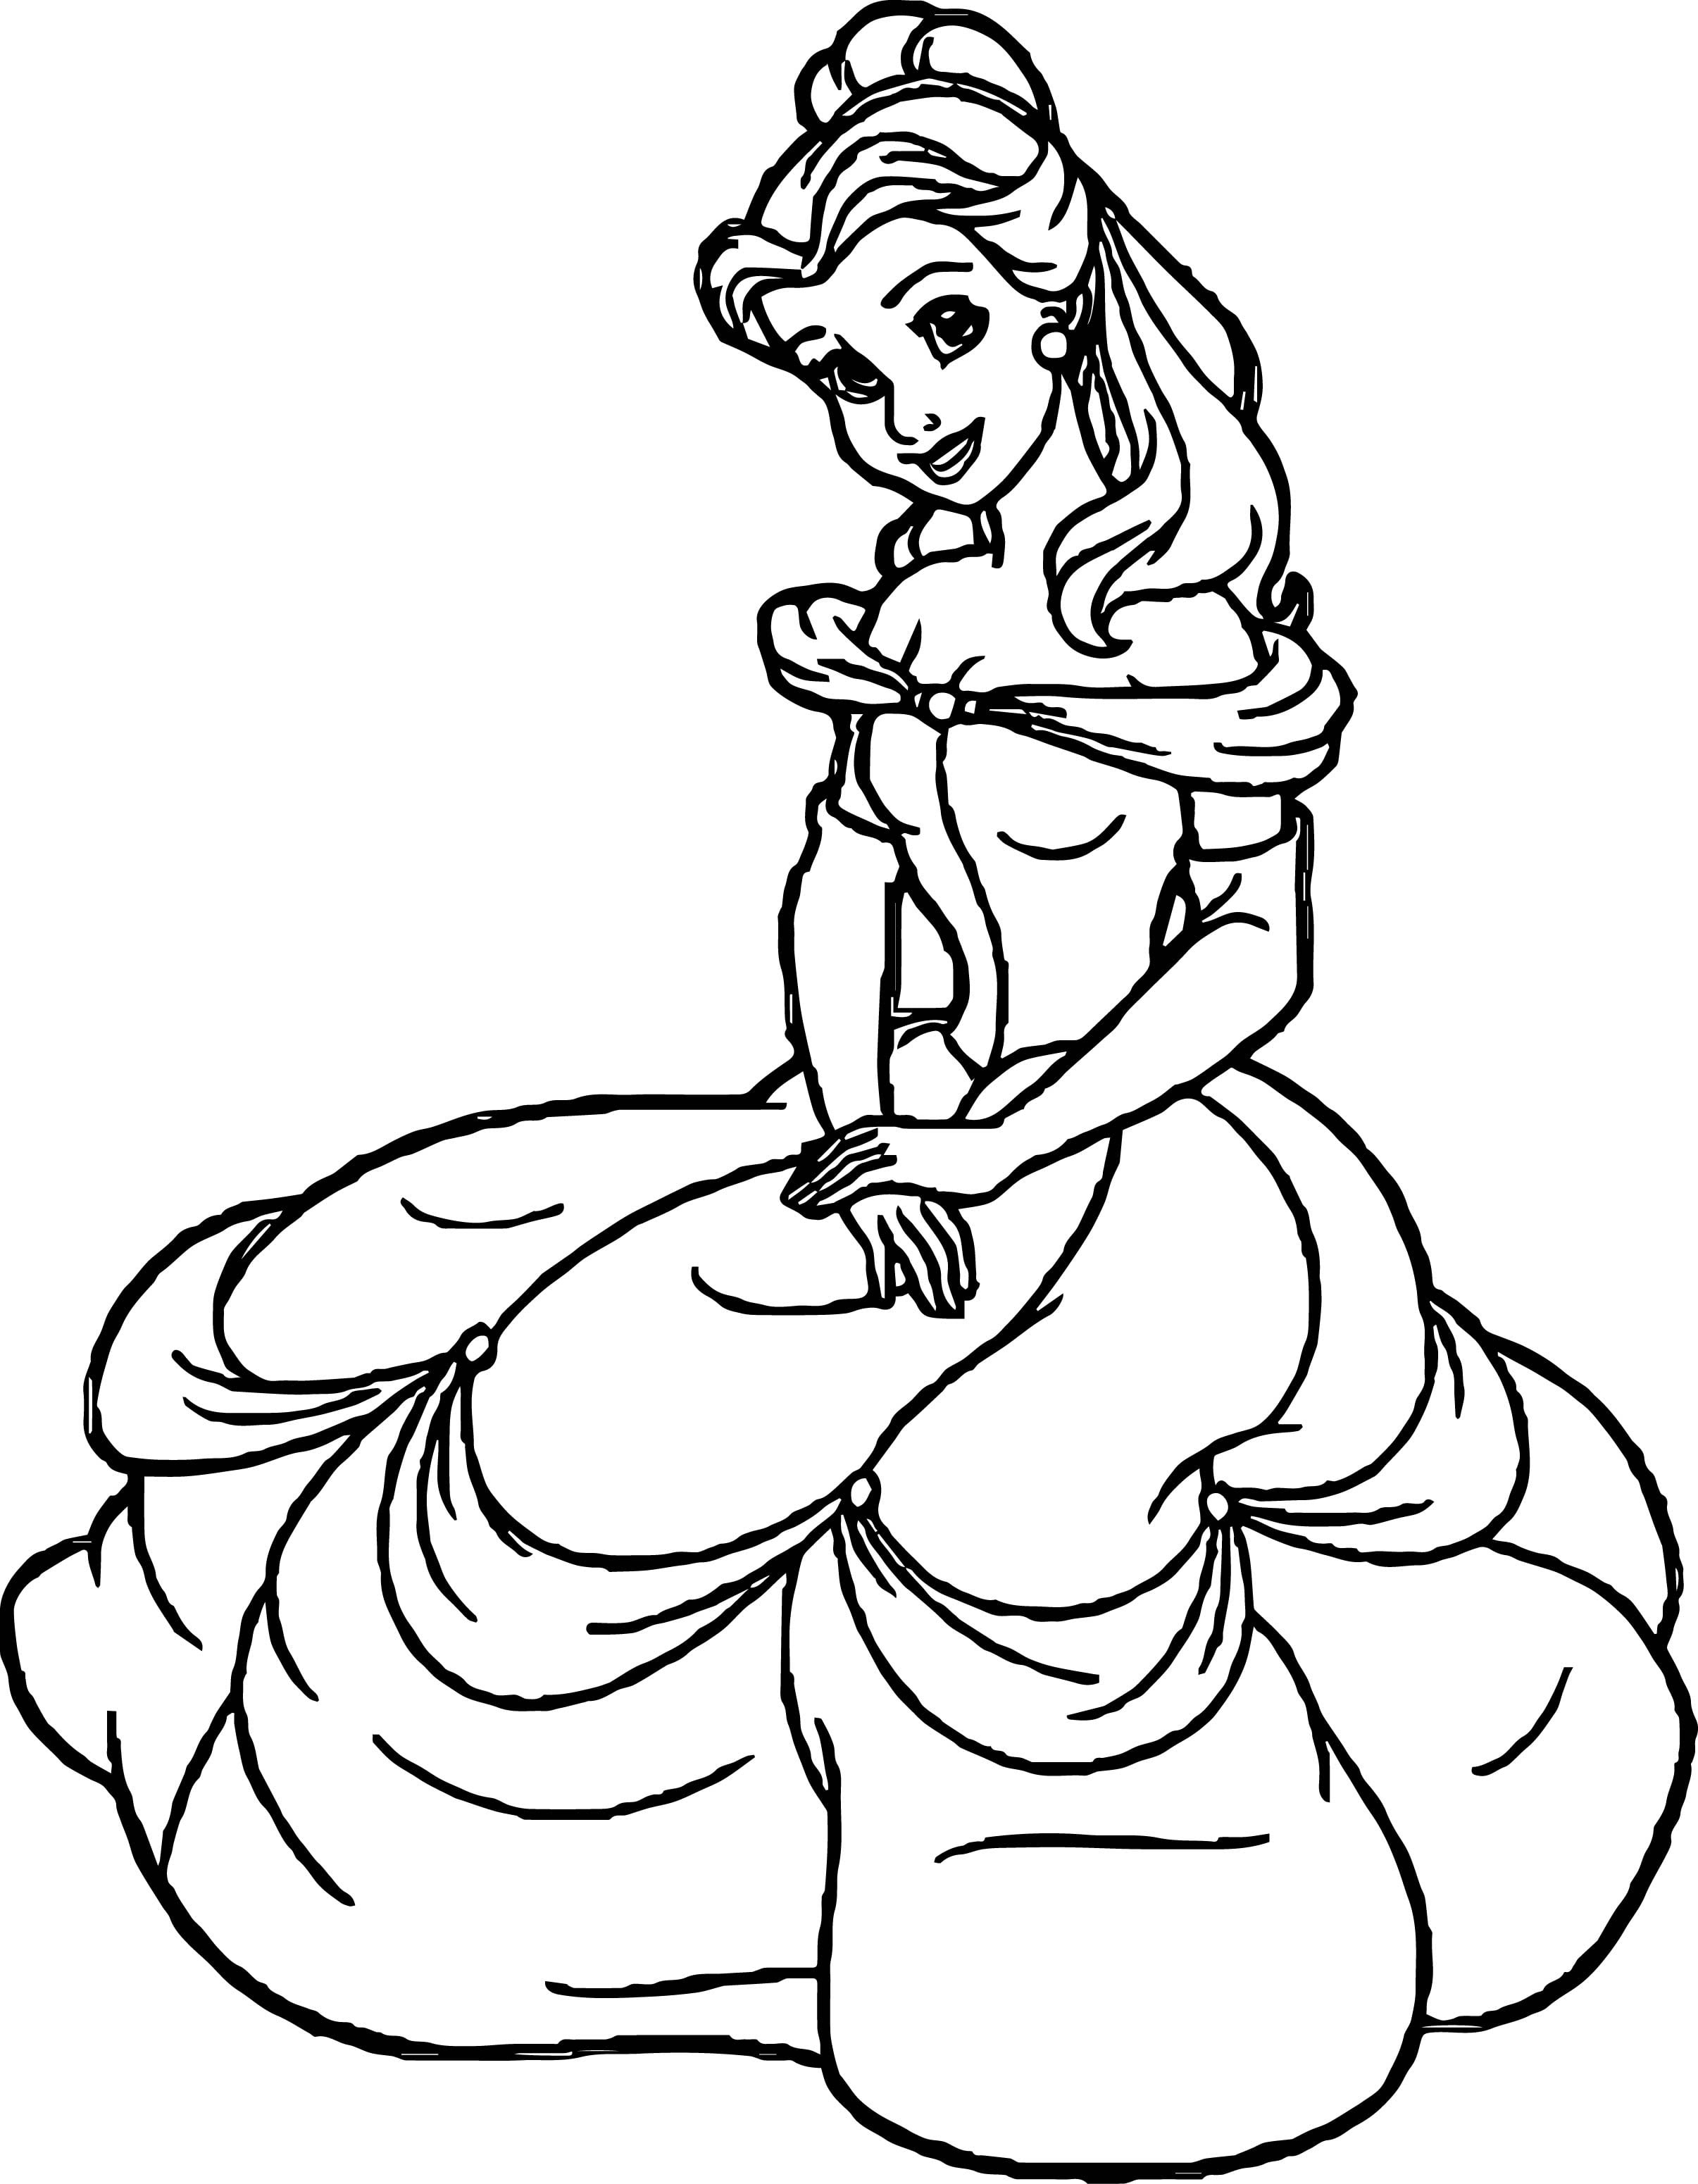 Princess Coloring Pages Best Coloring Pages For Kids Coloring Pages